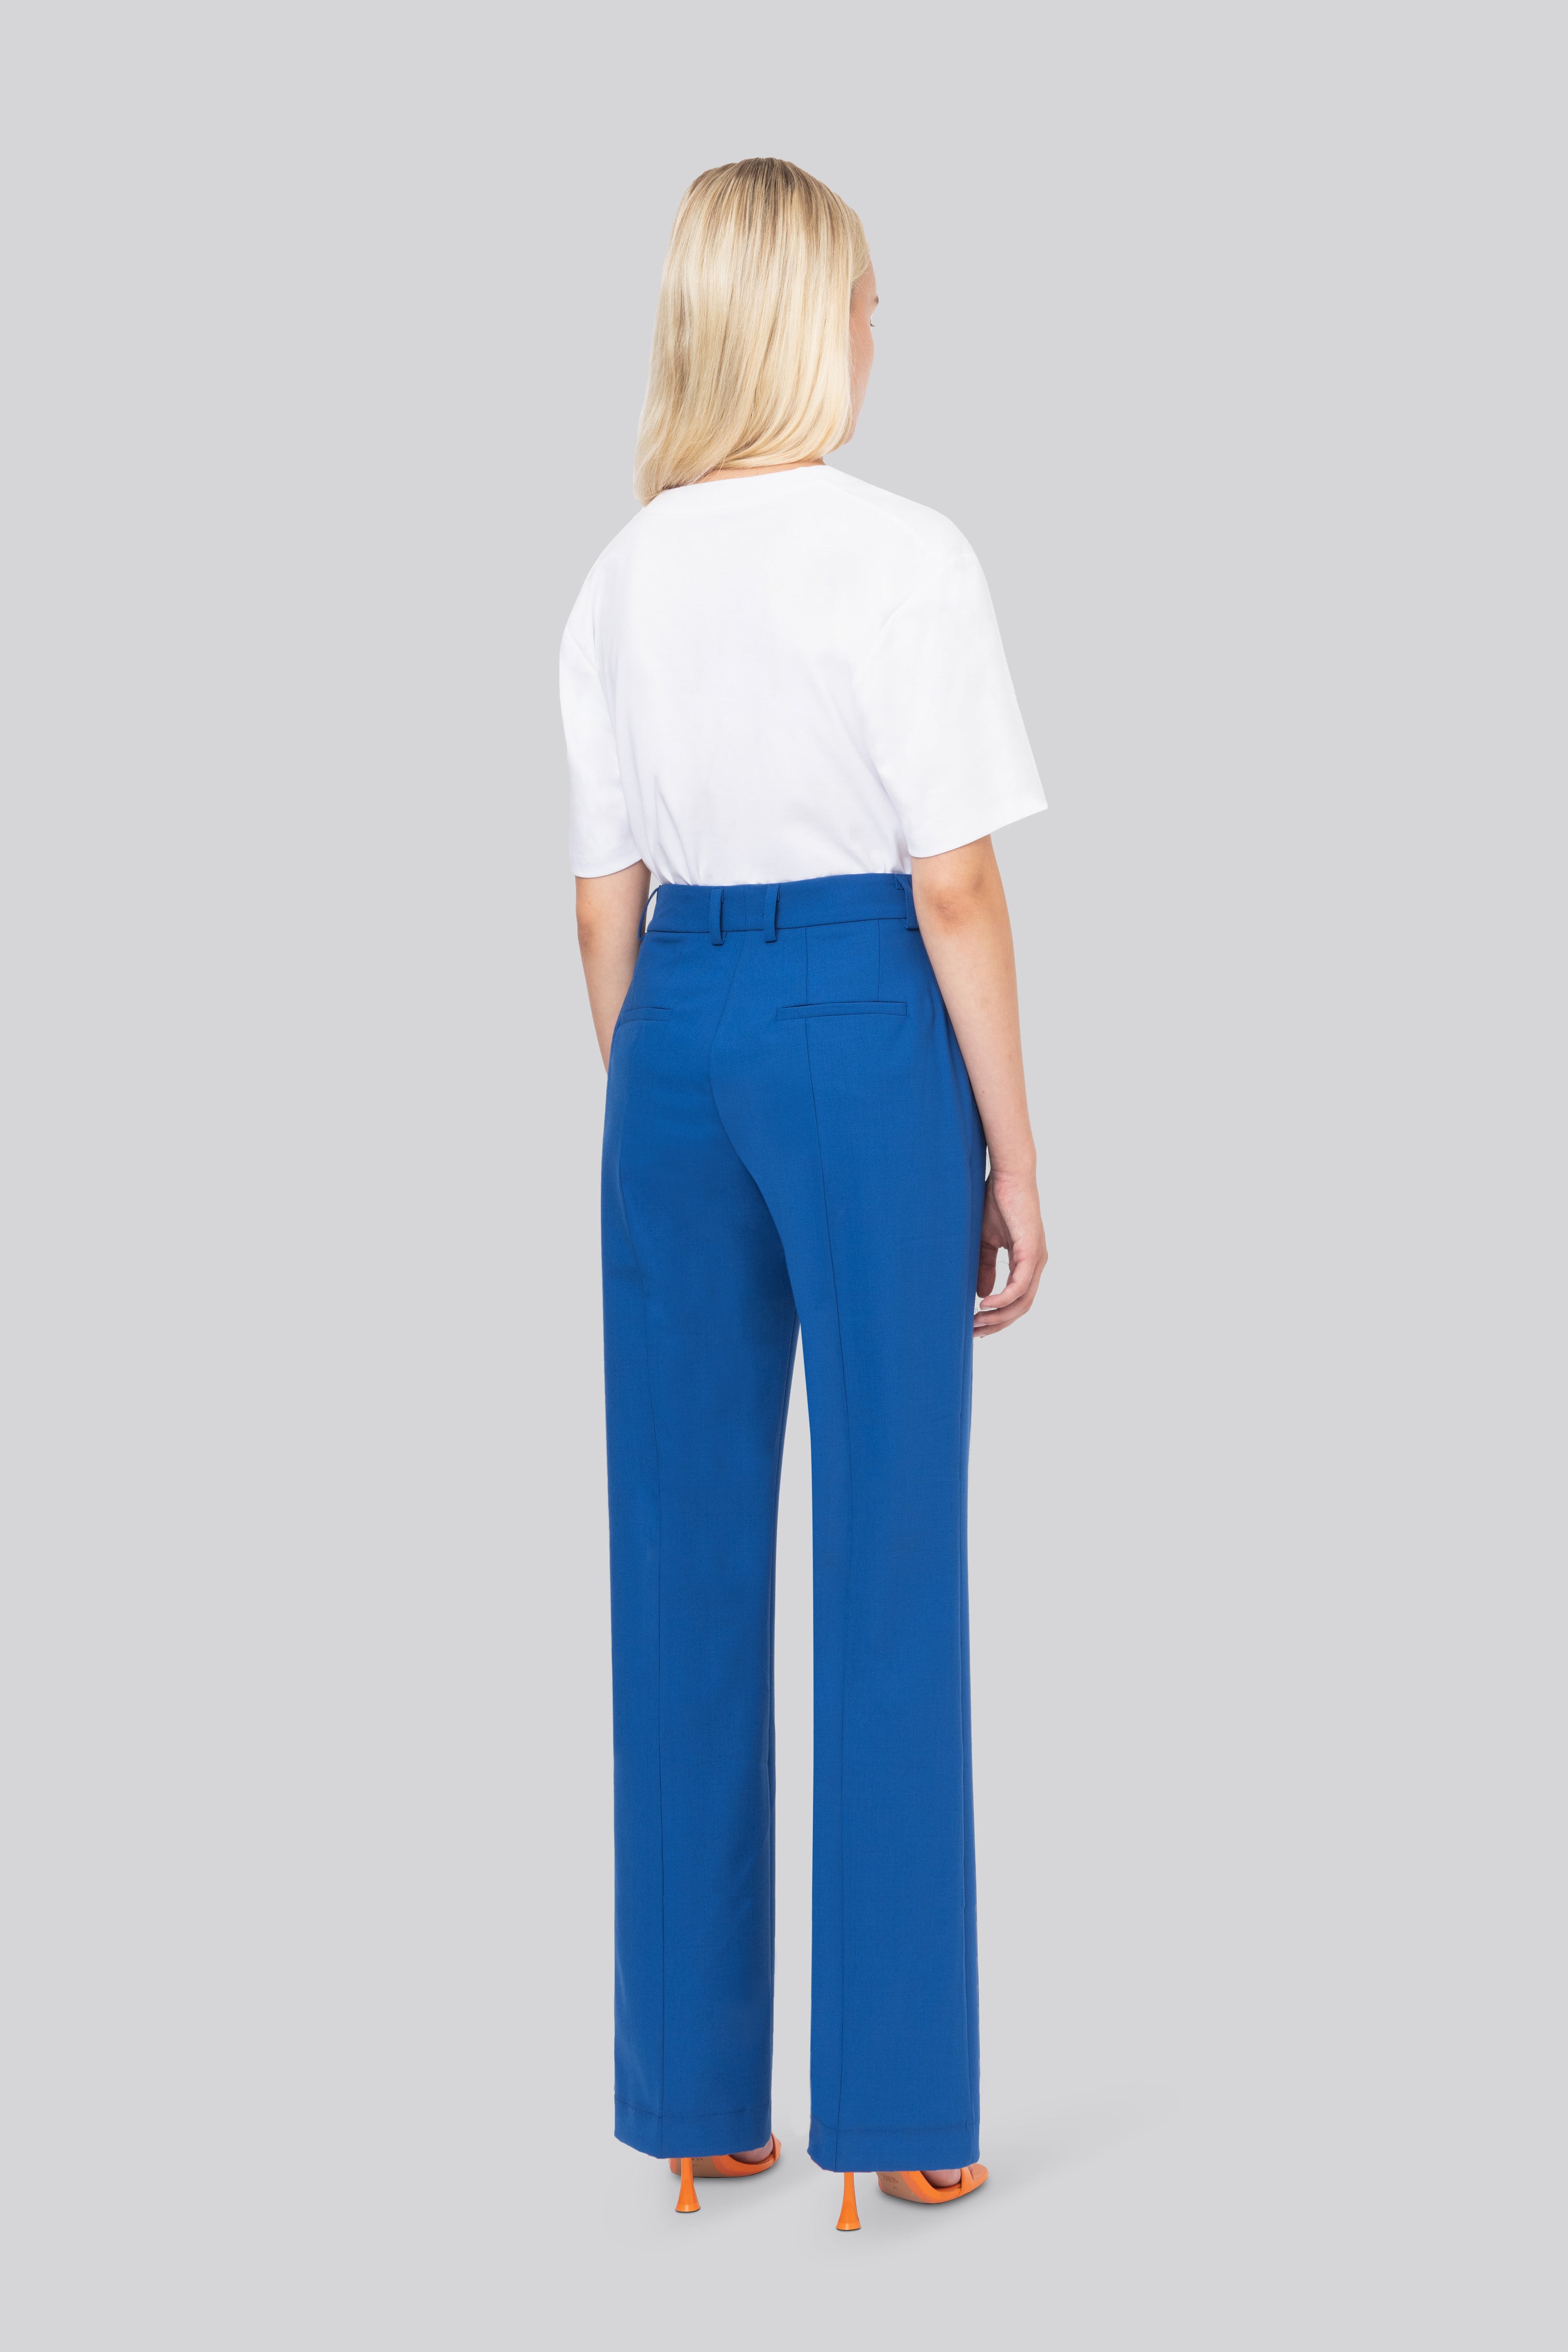 The Blue Canvas Lover Pants